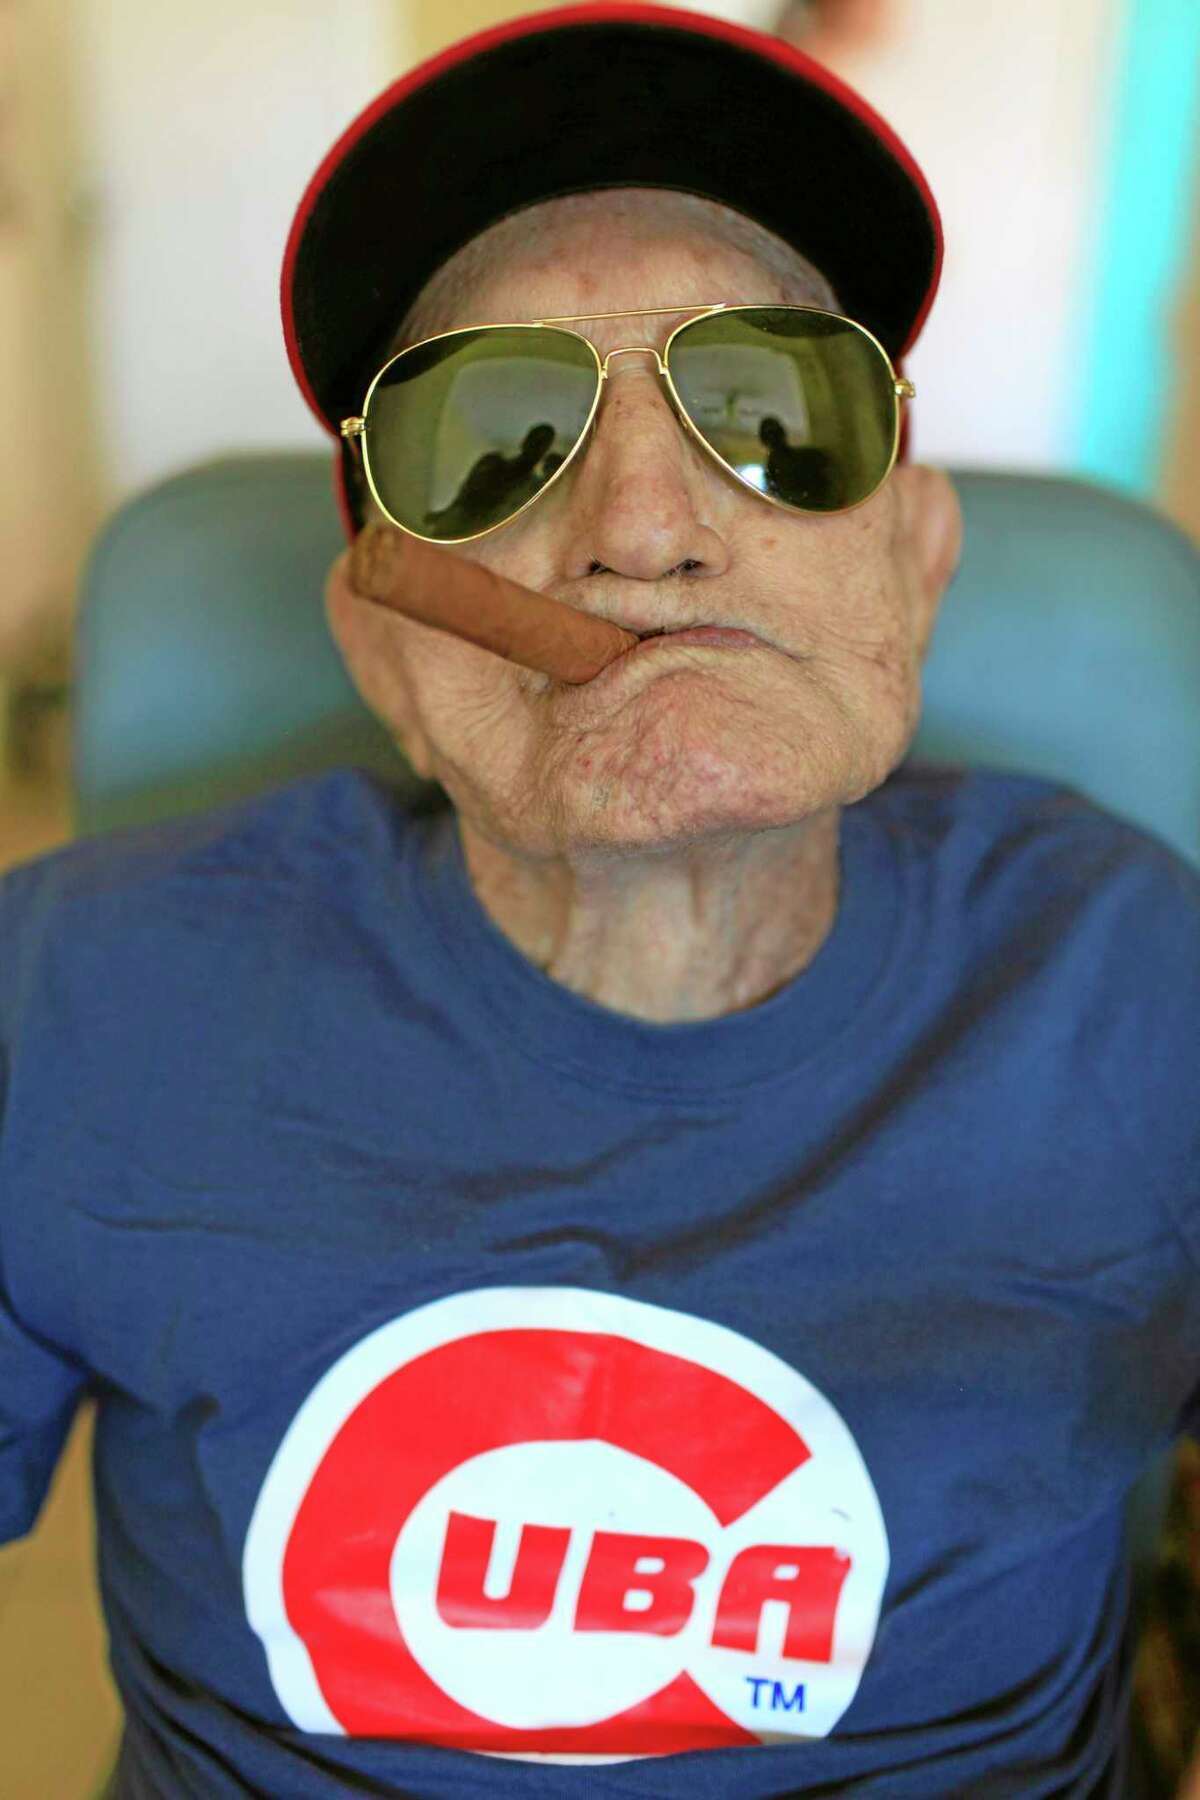 In this April 25, 2013 file photo, Conrado Marrero, the world’s oldest living former Major League Baseball player, poses for a photo on his 102 birthday at his home in Havana, Cuba. Family members say Marrero died Wednesday in Havana, just two days short of his 103rd birthday. Marrero was a diminutive right-hander who went by the nickname “Connie” when he pitched for the Washington Senators in the 1950s.